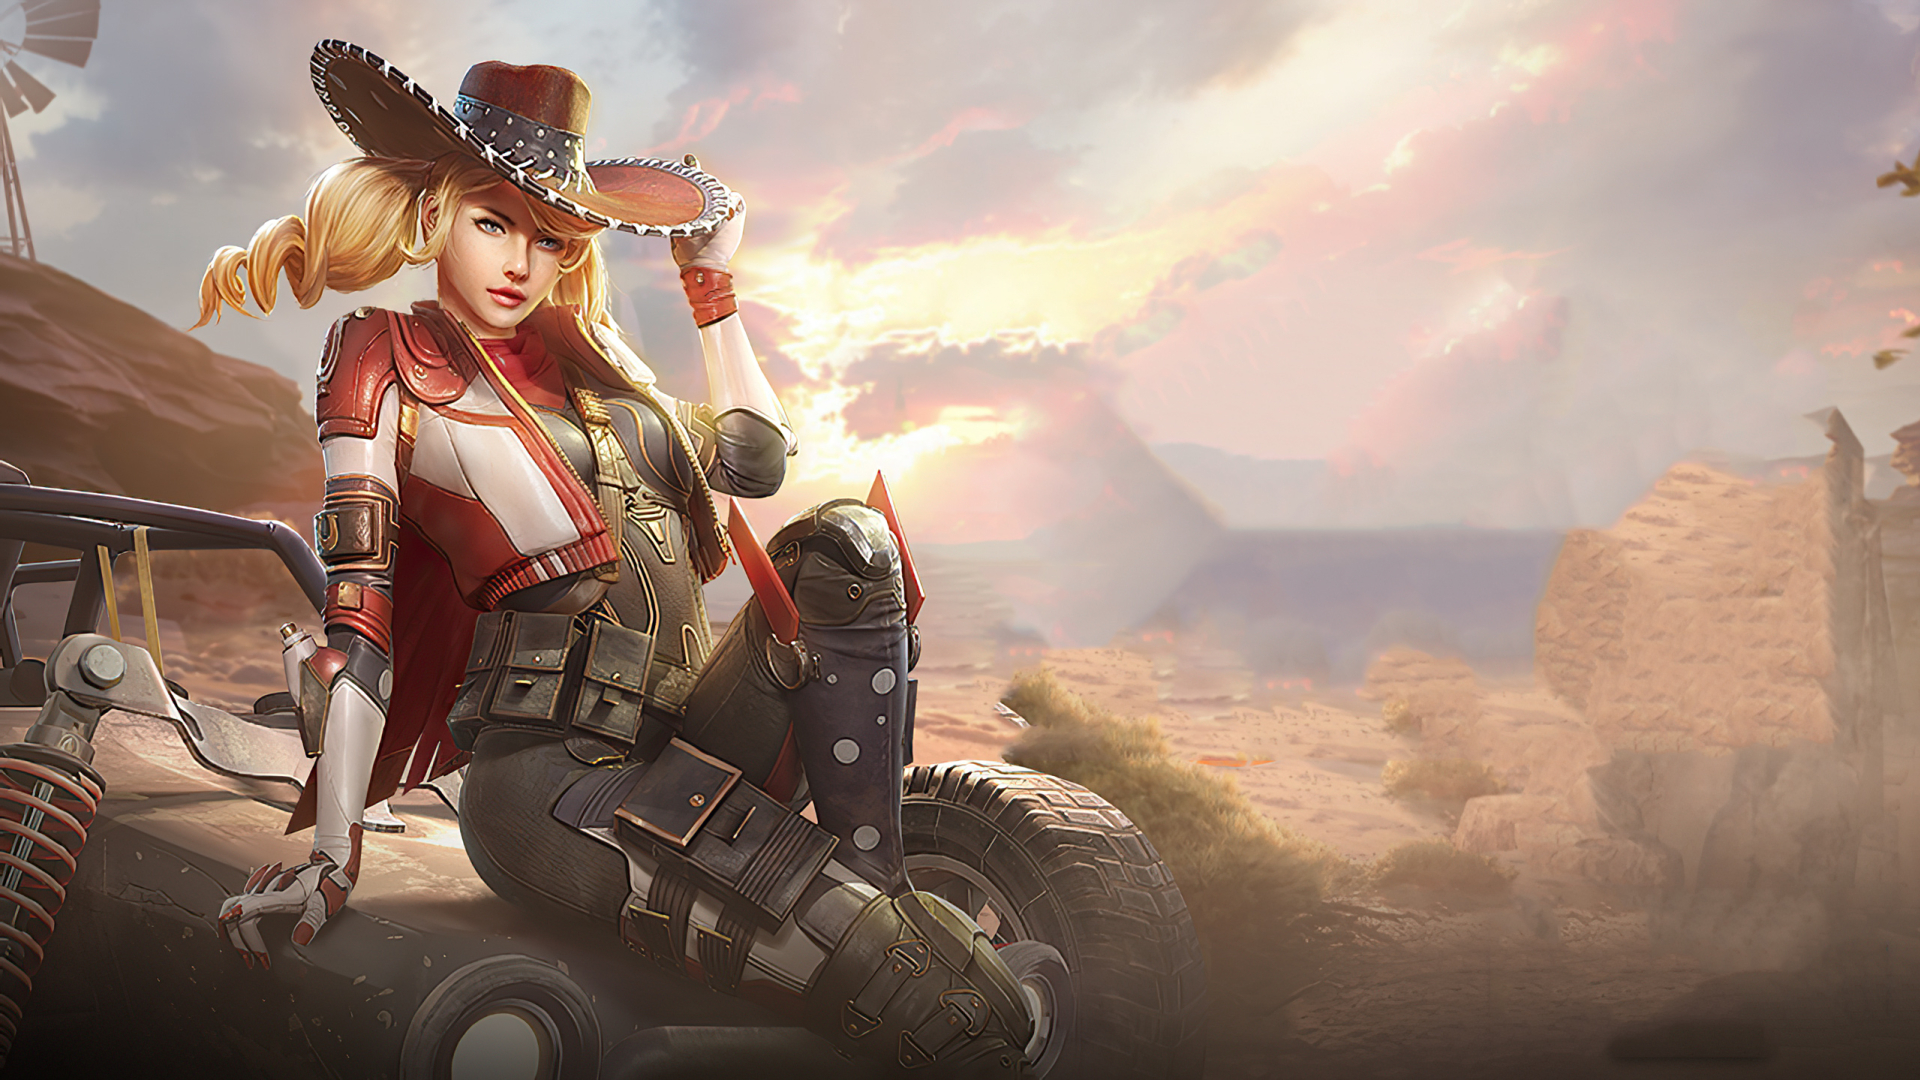 Cowgirl 1080p